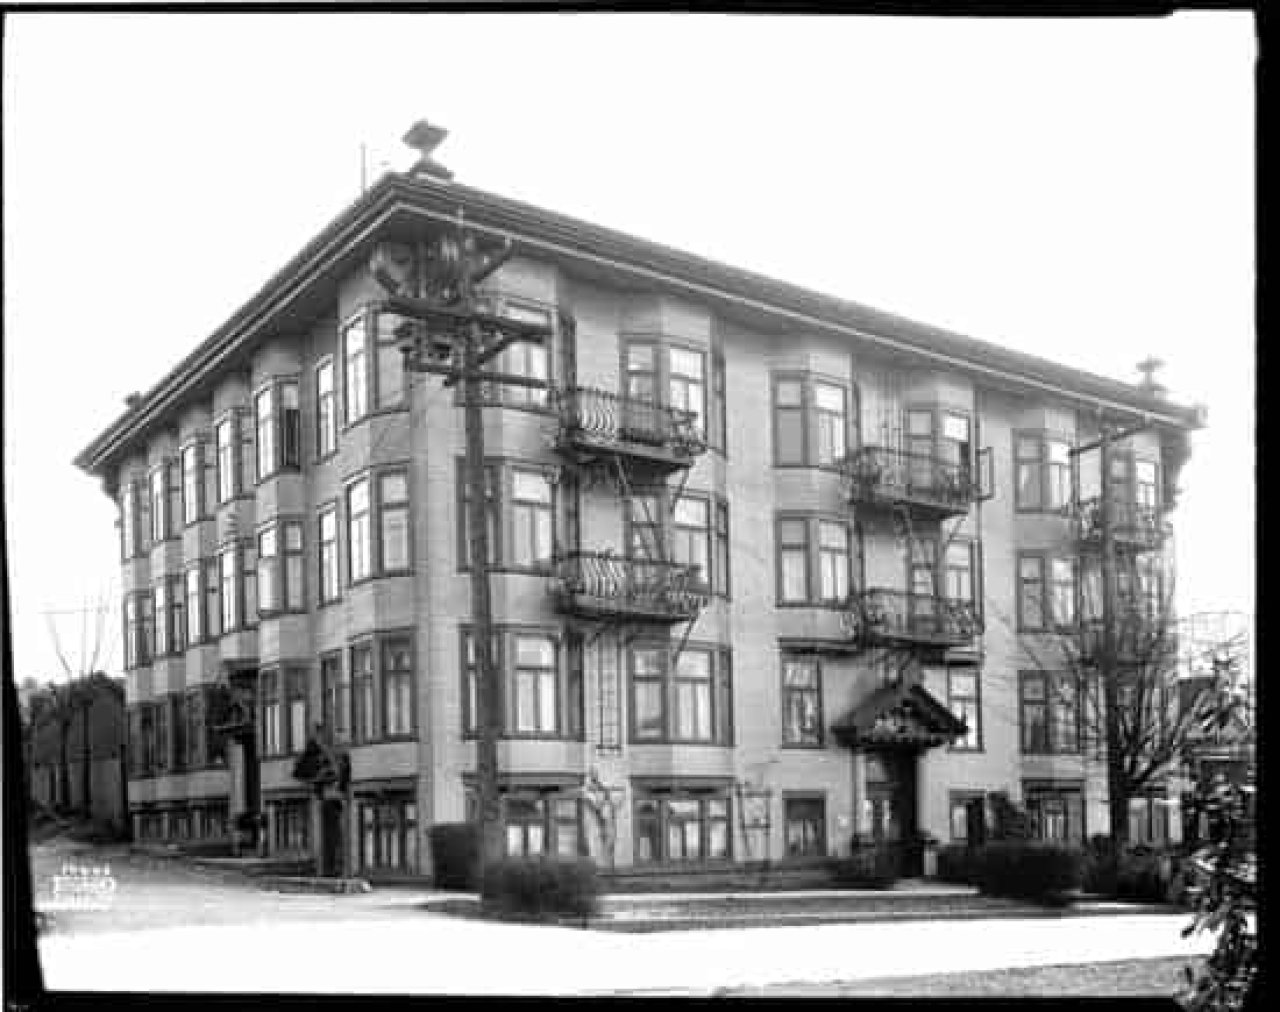 1306 Bidwell Street in 1926. VPL Accession Number 22251